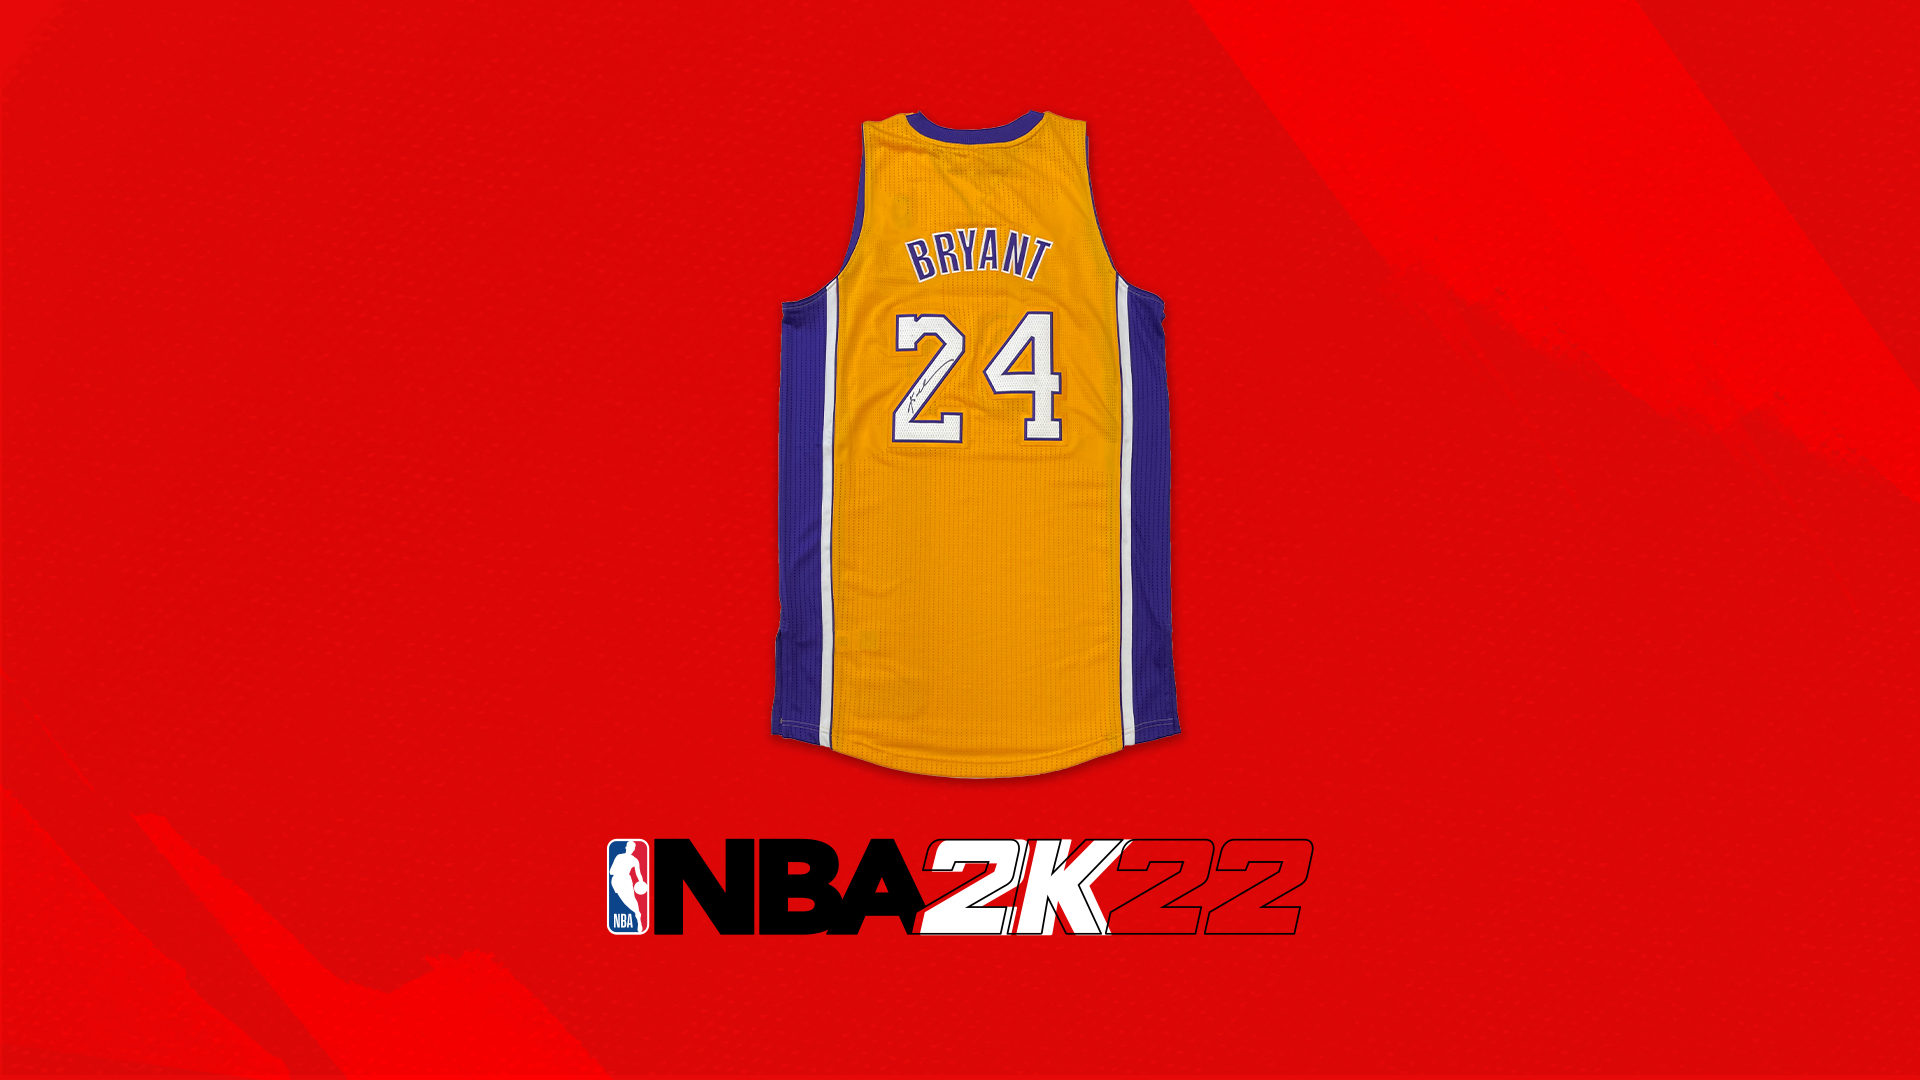 NBA 2K on X: #2KDay Giveaway 🐍 Mamba Mentality. Reply with #2KDay and # giveaway for a chance to win a signed Kobe Bryant Jersey. Rules ➡️    / X